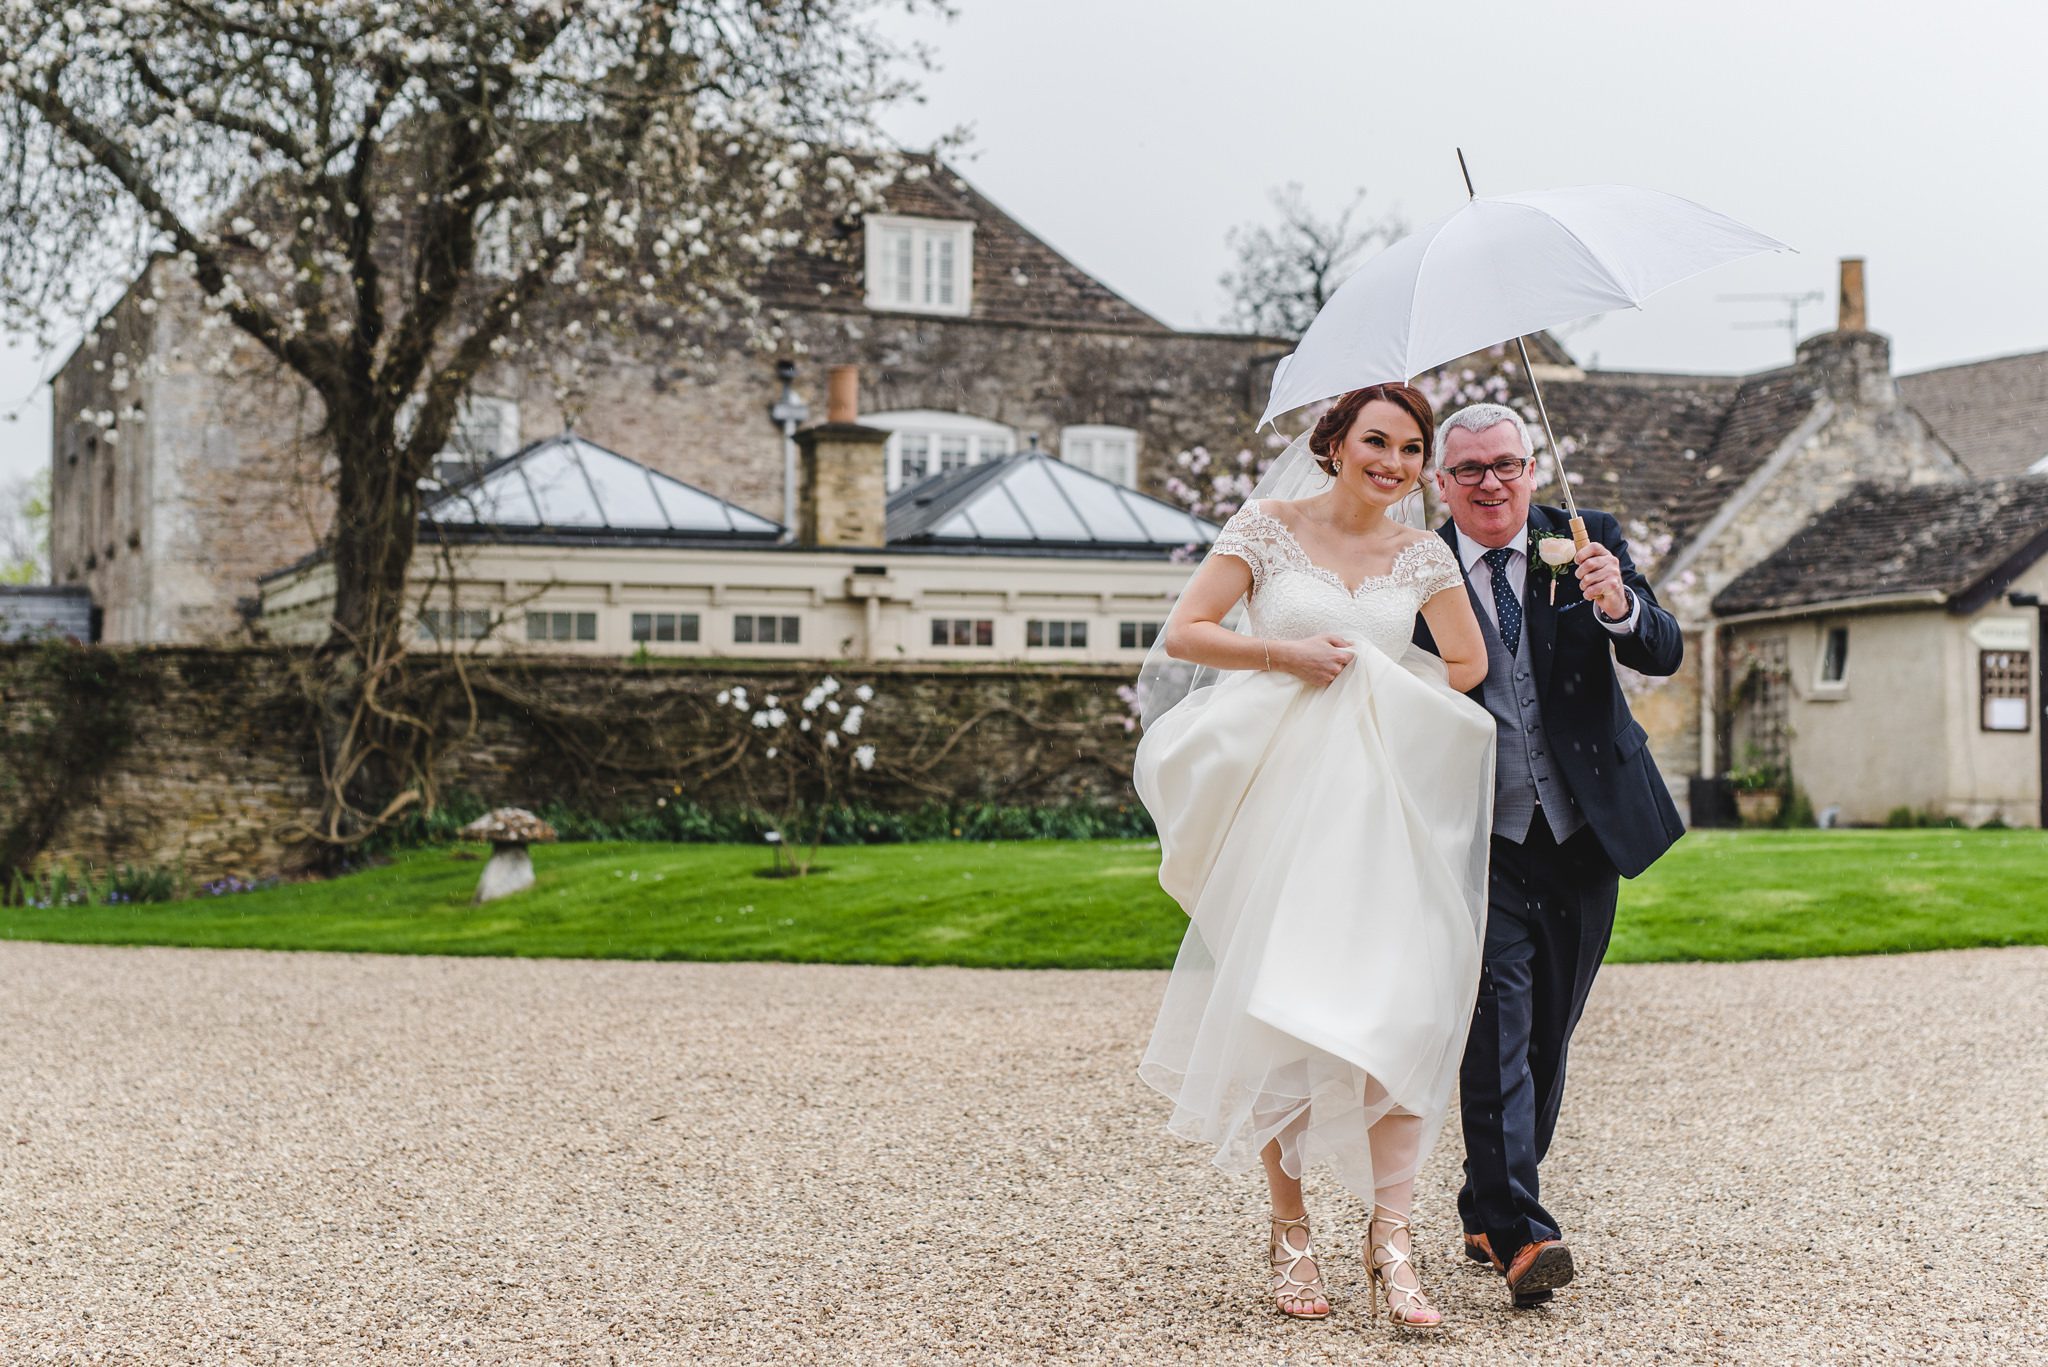 Bride and father walking with umbrella in tetbury before their wedding ceremony